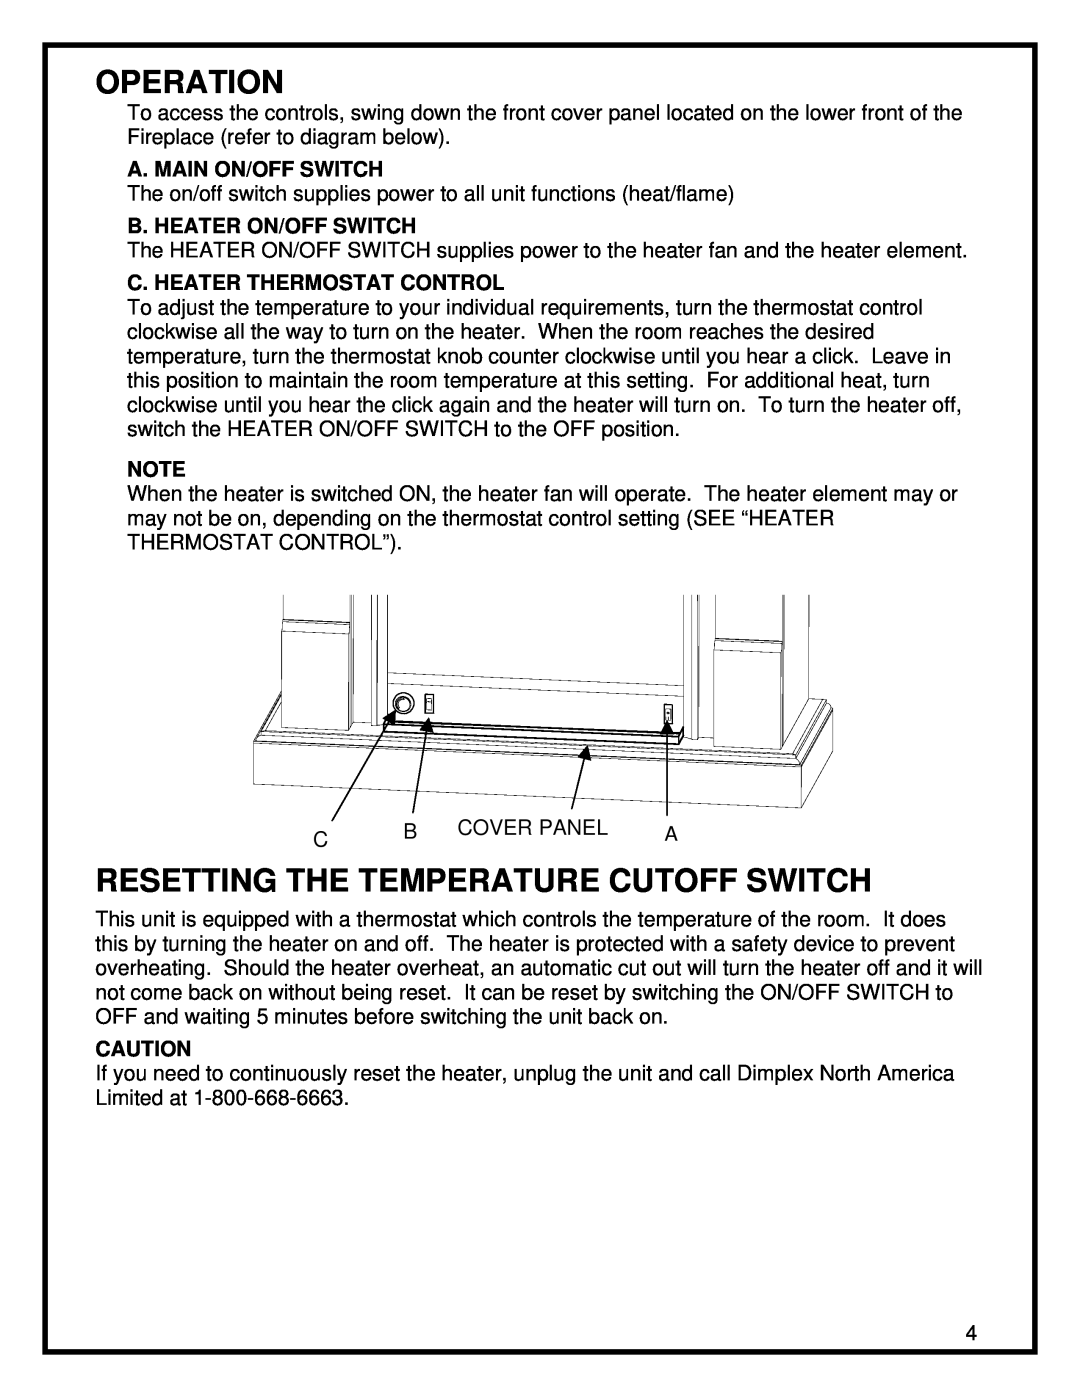 Dimplex COMPACT FIREPLACE manual Operation, Resetting The Temperature Cutoff Switch, A. Main On/Off Switch 